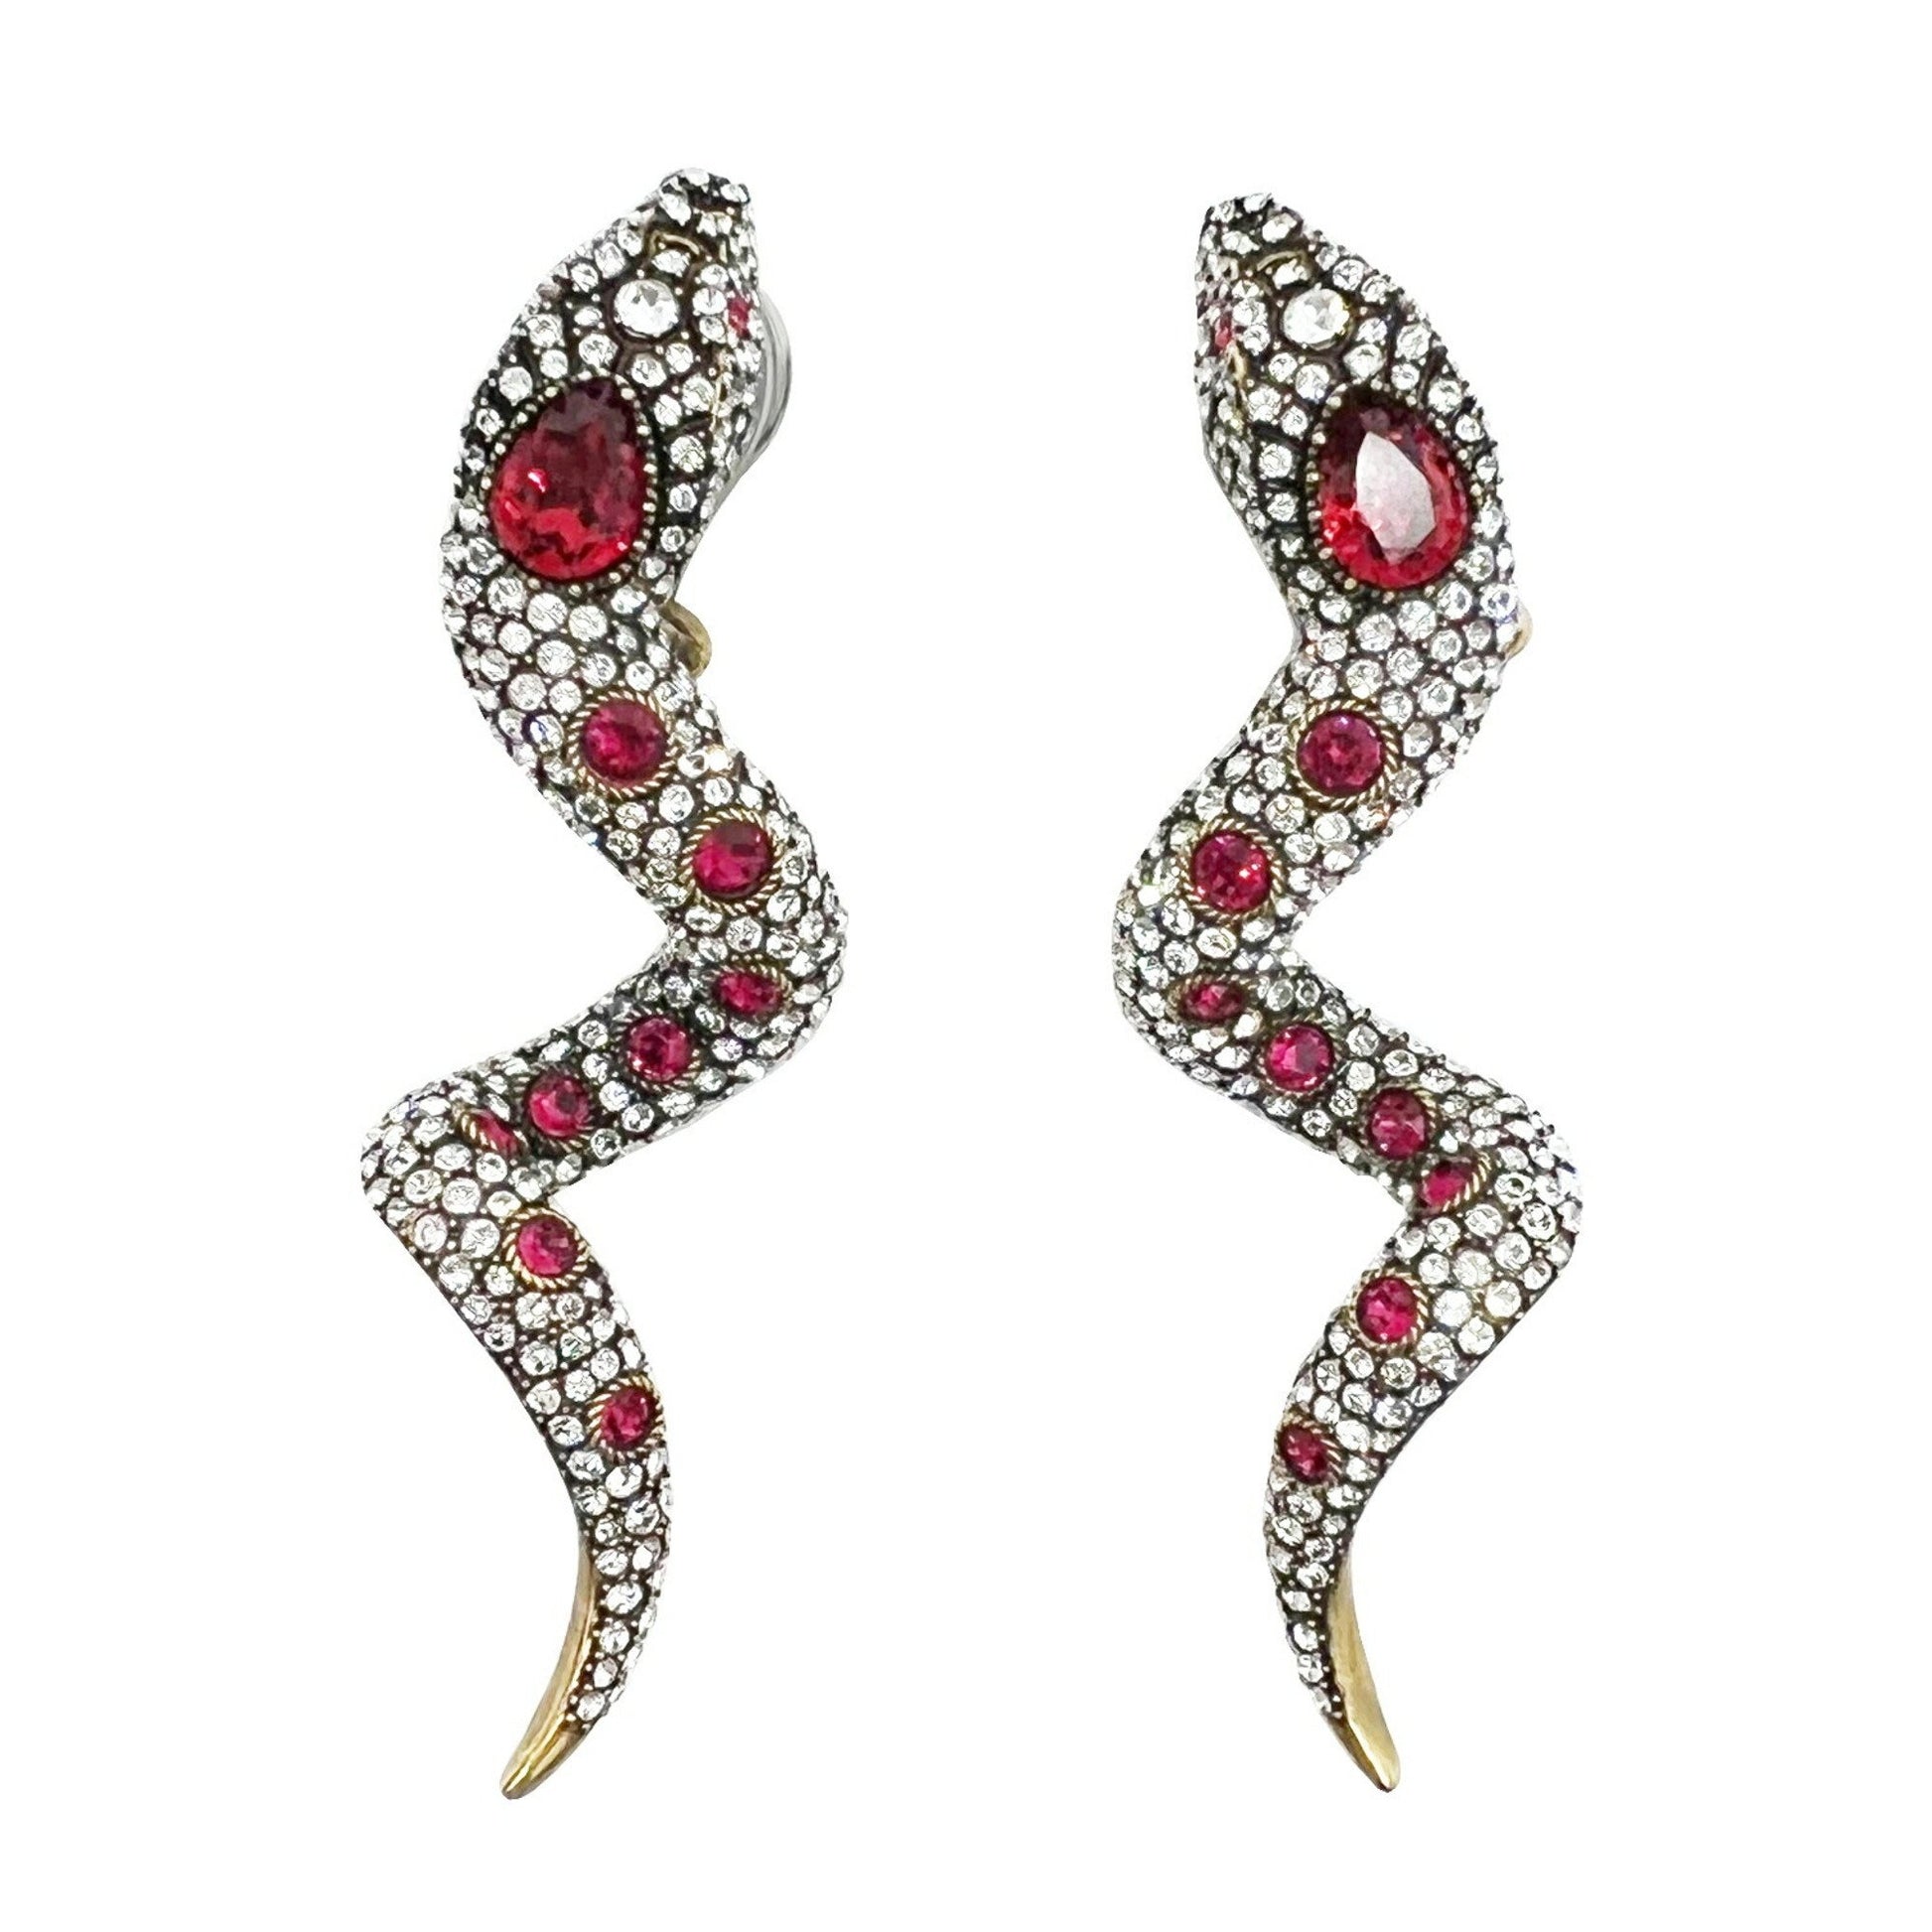 Gucci Crystal Snake Earrings Color Stone Red Antique Style Women's Acc